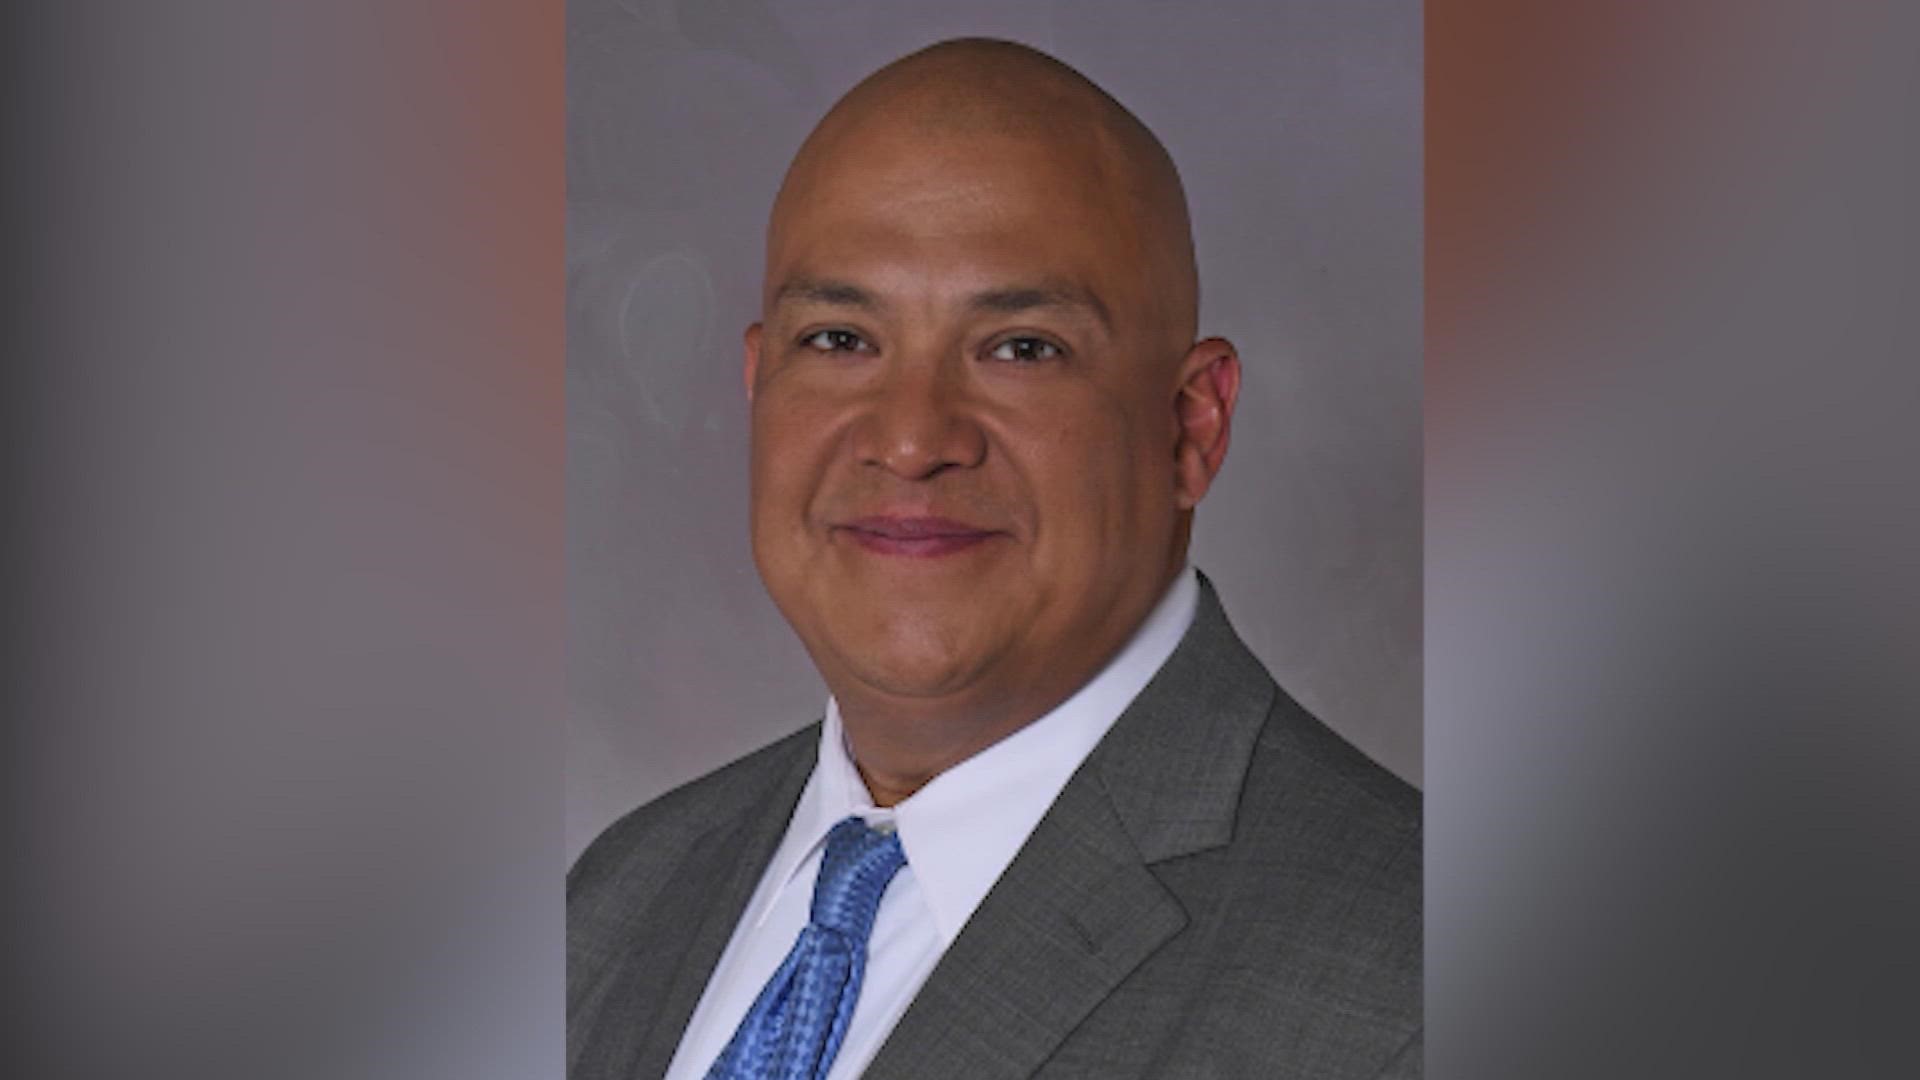 Arredondo has faced heavy criticism for failing to organize law enforcement's response to the Robb Elementary shooting, and many in the community want him fired.